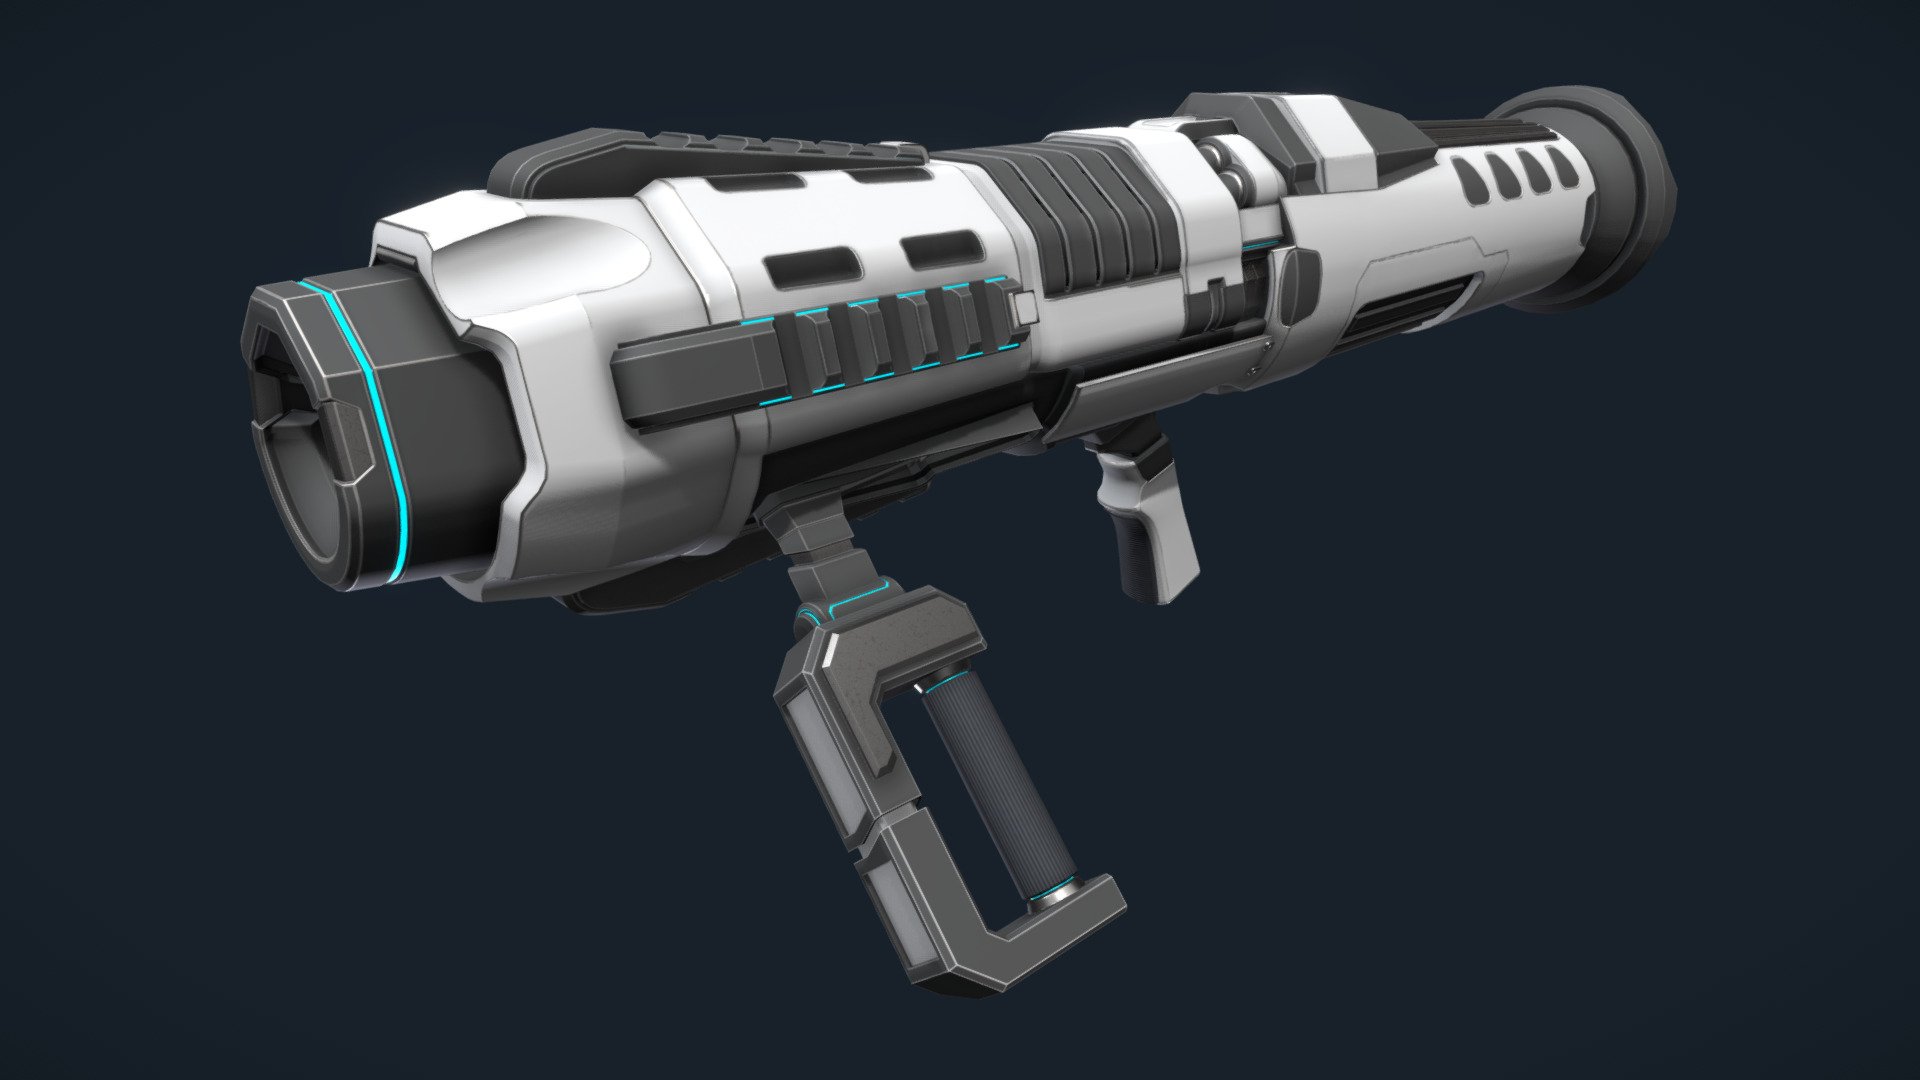 Made for Momentum Mod’s Defrag gamemode https://momentum-mod.org/

A spinoff of the &lsquo;original' Quake 1 rocket launcher, this weapon is the counterpart to my previous rocket launcher for our Team Fortress 2 Rocket Jump gamemode. Really enjoyed working the shapes out on the front half of this one. In the future, I would like to reimagine the midsection and rear details, but I'm nevertheless quite proud of this one!

https://twitter.com/False_3D

https://www.artstation.com/ethanvuong - Momentum Mod - Rocket Launcher (Defrag) - 3D model by False_ (@ethanvuong) 3d model